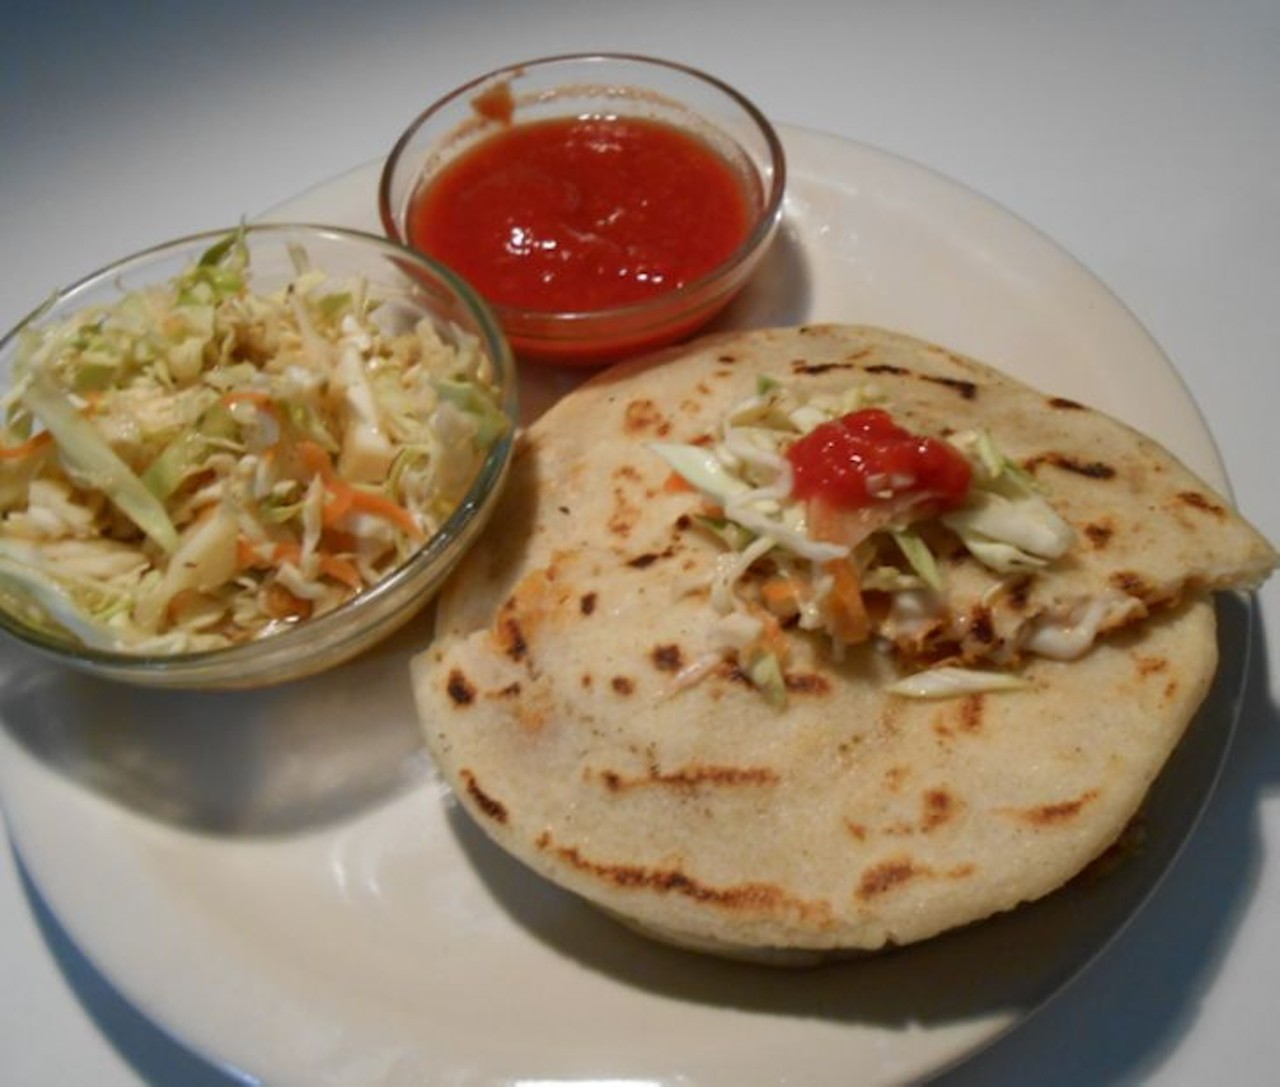 What we recommend: pupusa revuelta 
For those who love pork and cheese, this soft tortilla dish topped with spicy curtido cole slaw is sure to hit the spot. It's easy to see why pupusas are a Central American favorite.
Photo via www.pupuseriamaya.net